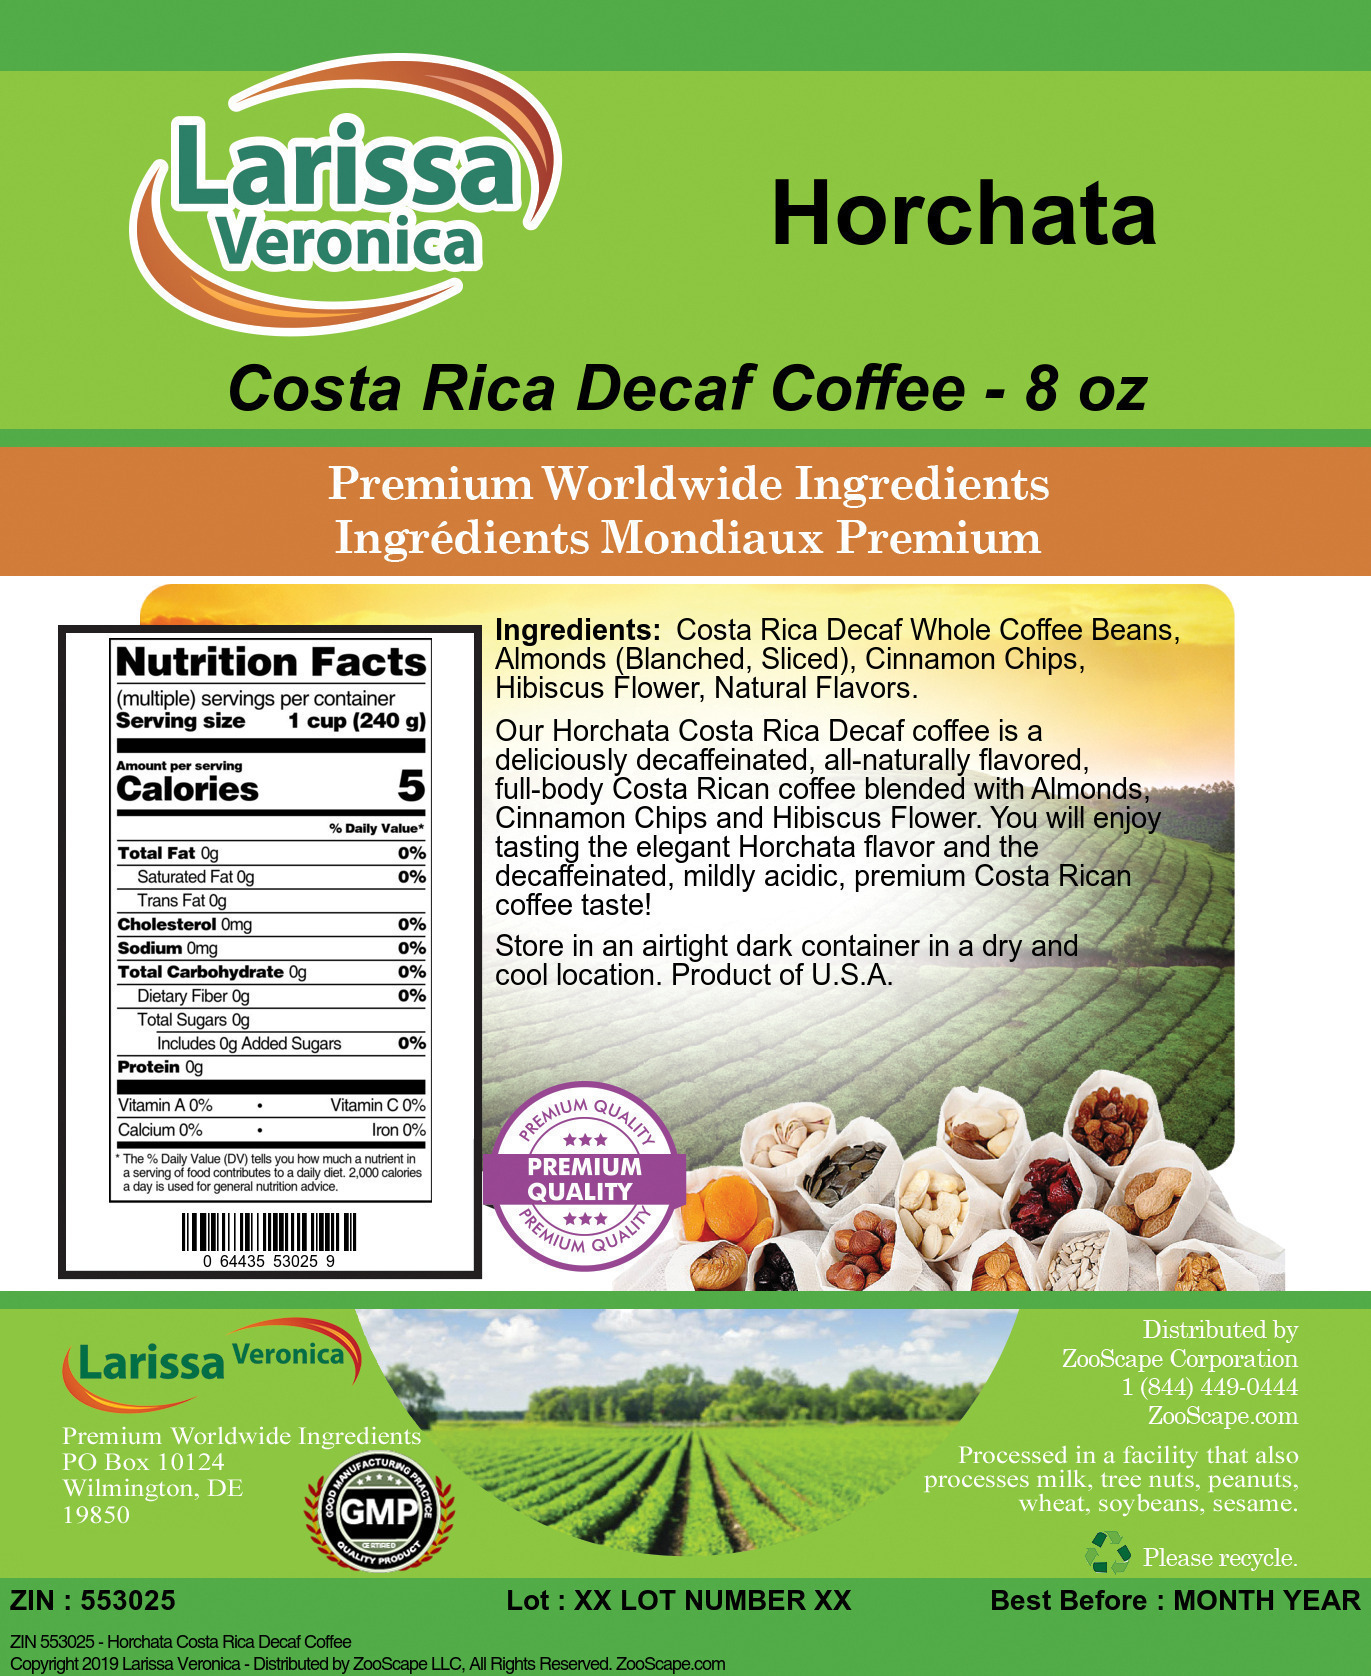 Horchata Costa Rica Decaf Coffee - Label